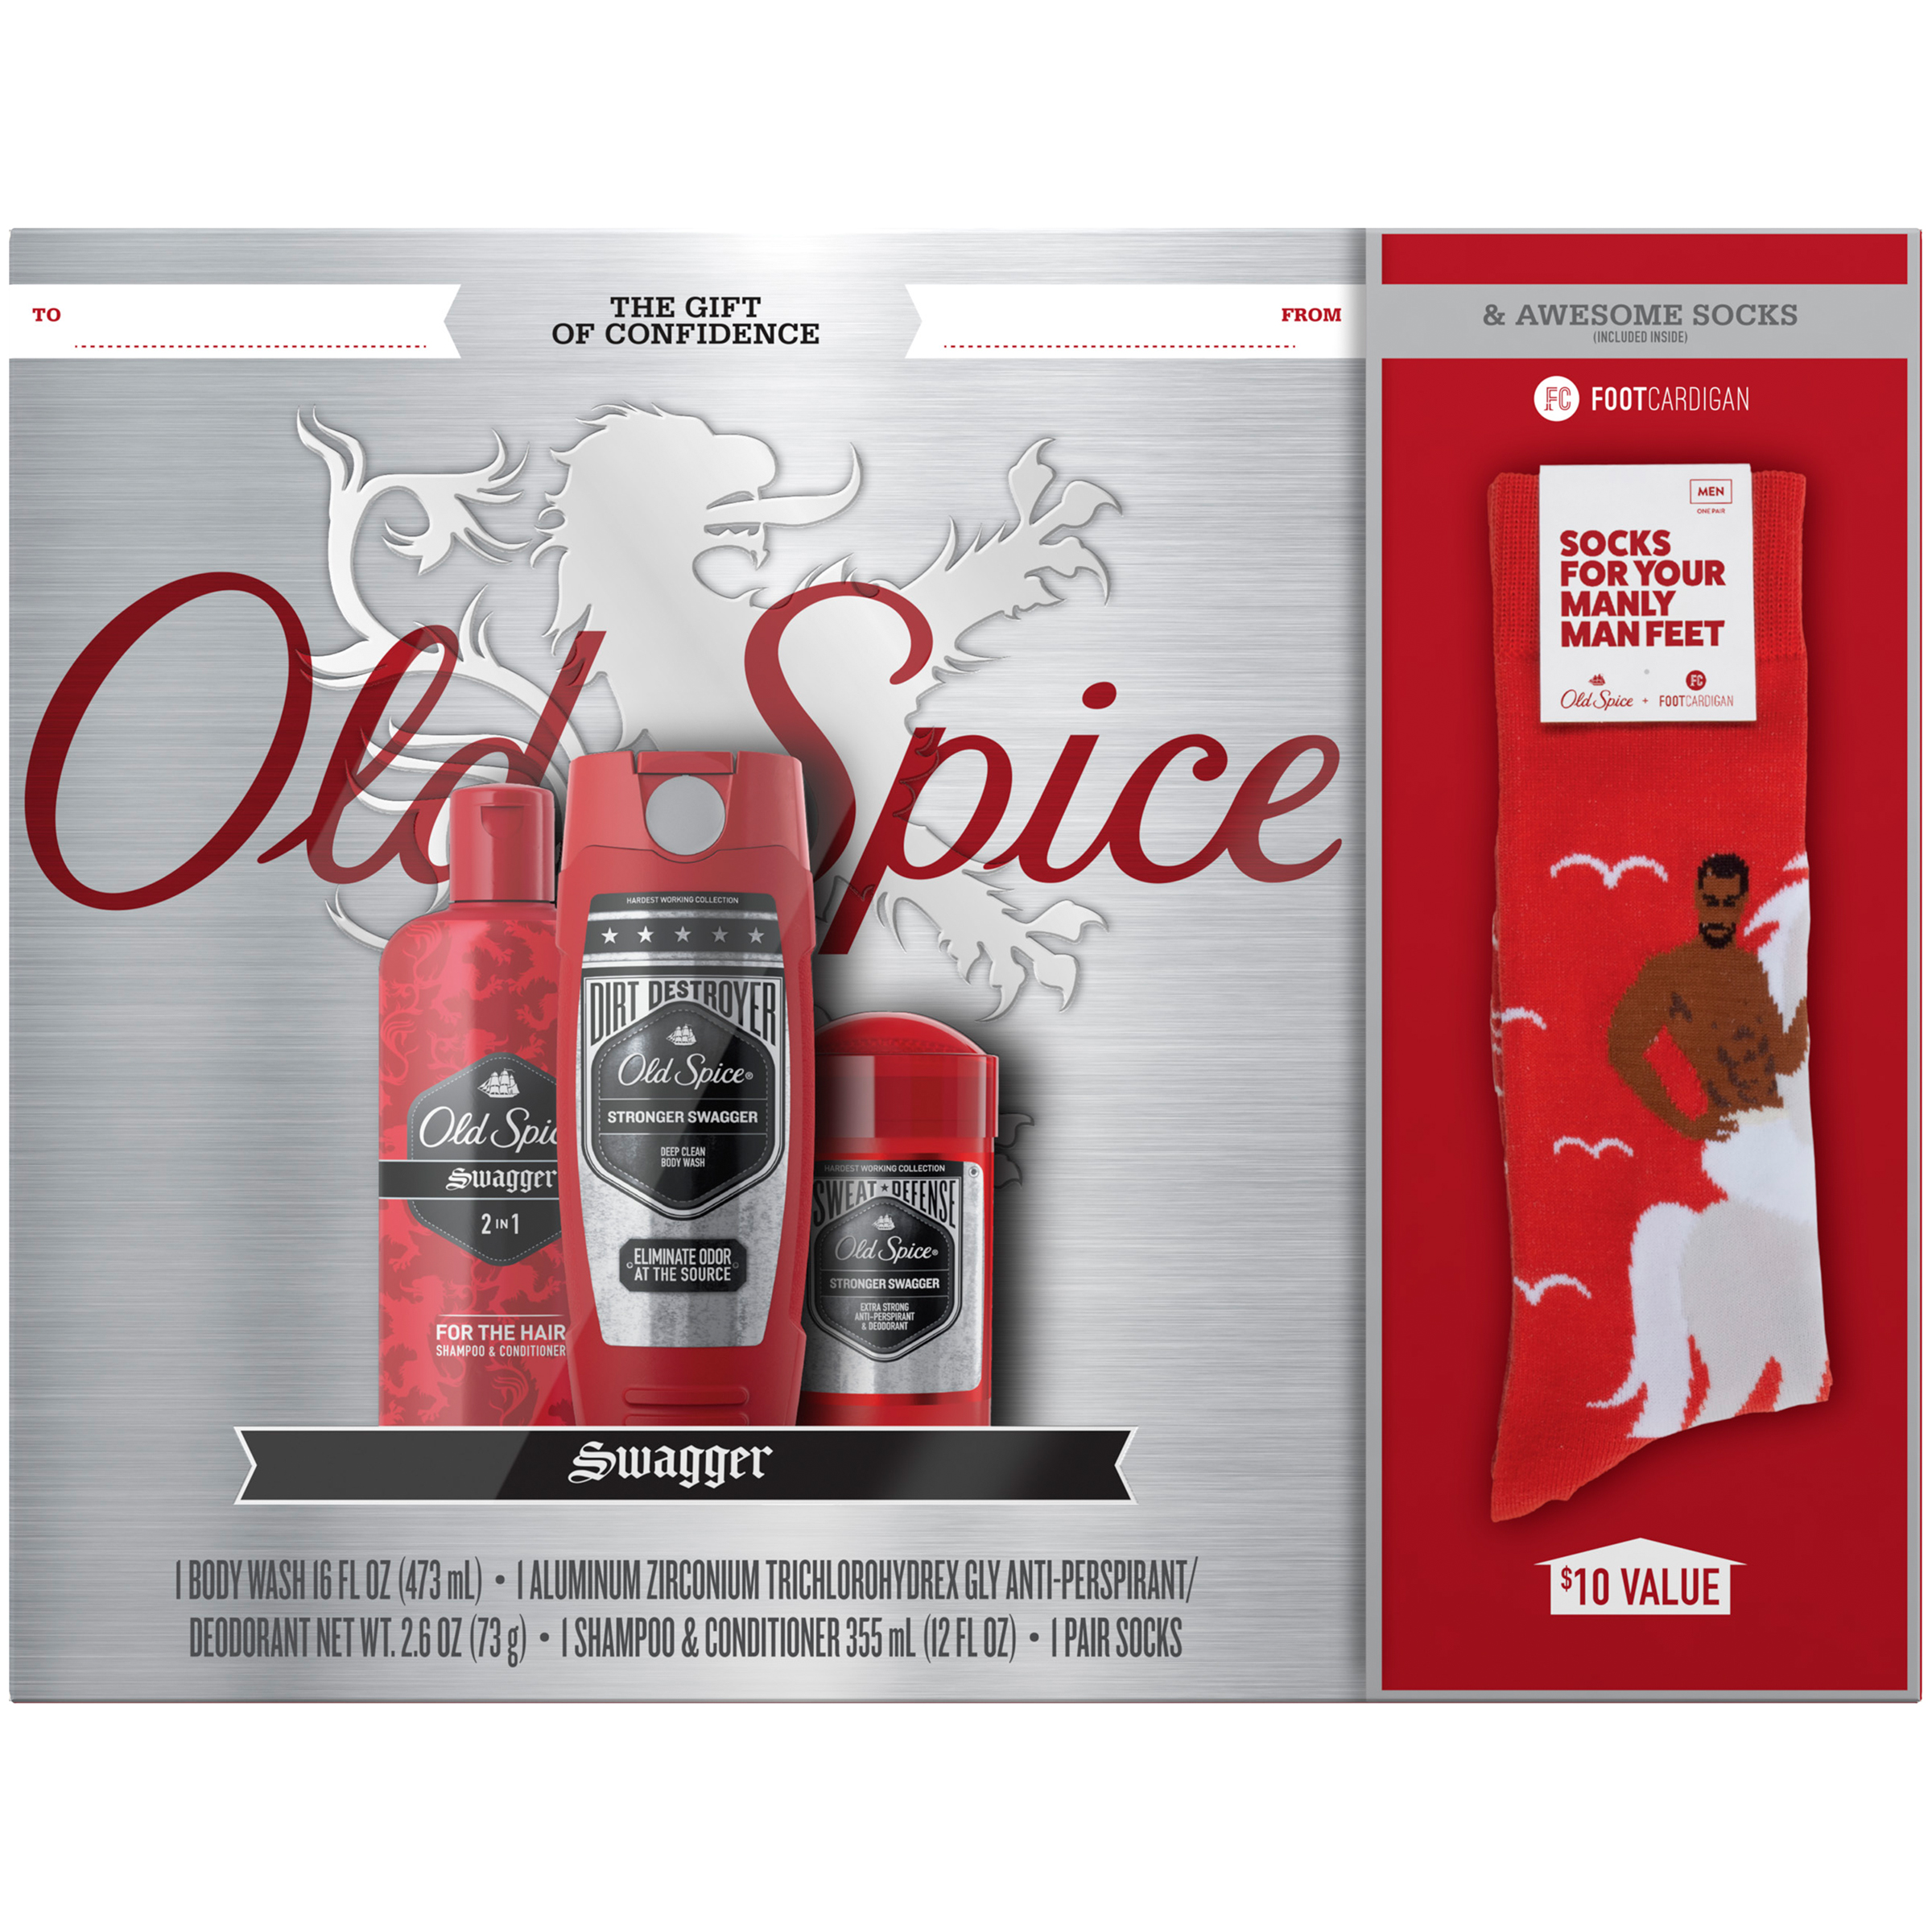 Old Spice Swagger Hardest Working Collection Body Wash, Deodorant and Shampoo & Conditioner Gift of Confidence Gift Pack (Free Socks Included) - image 1 of 6